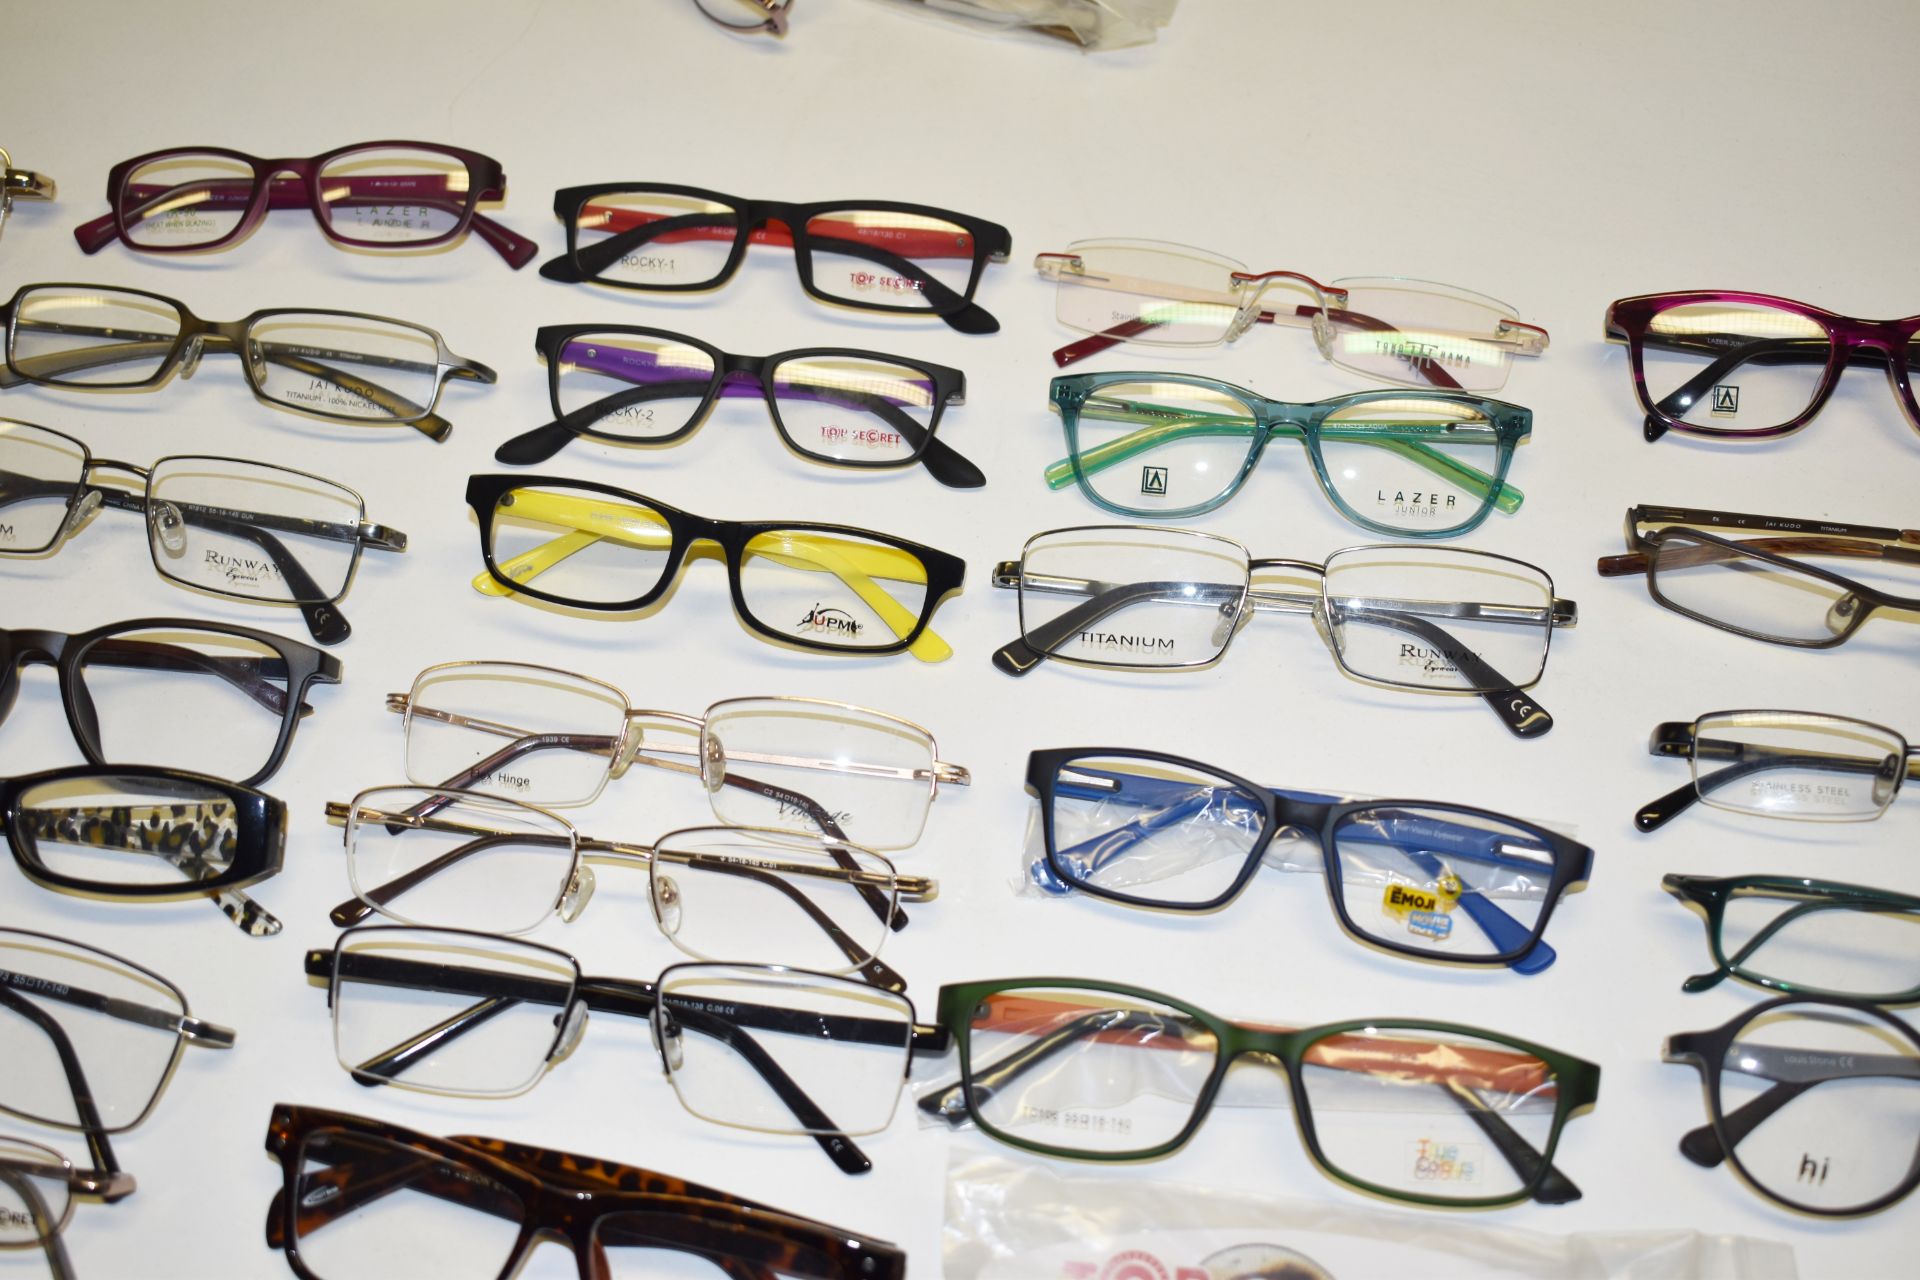 100 x Assorted Pairs of Spectacle Eye Glasses - New and Unused Stock - Various Designs and Brands - Image 8 of 27